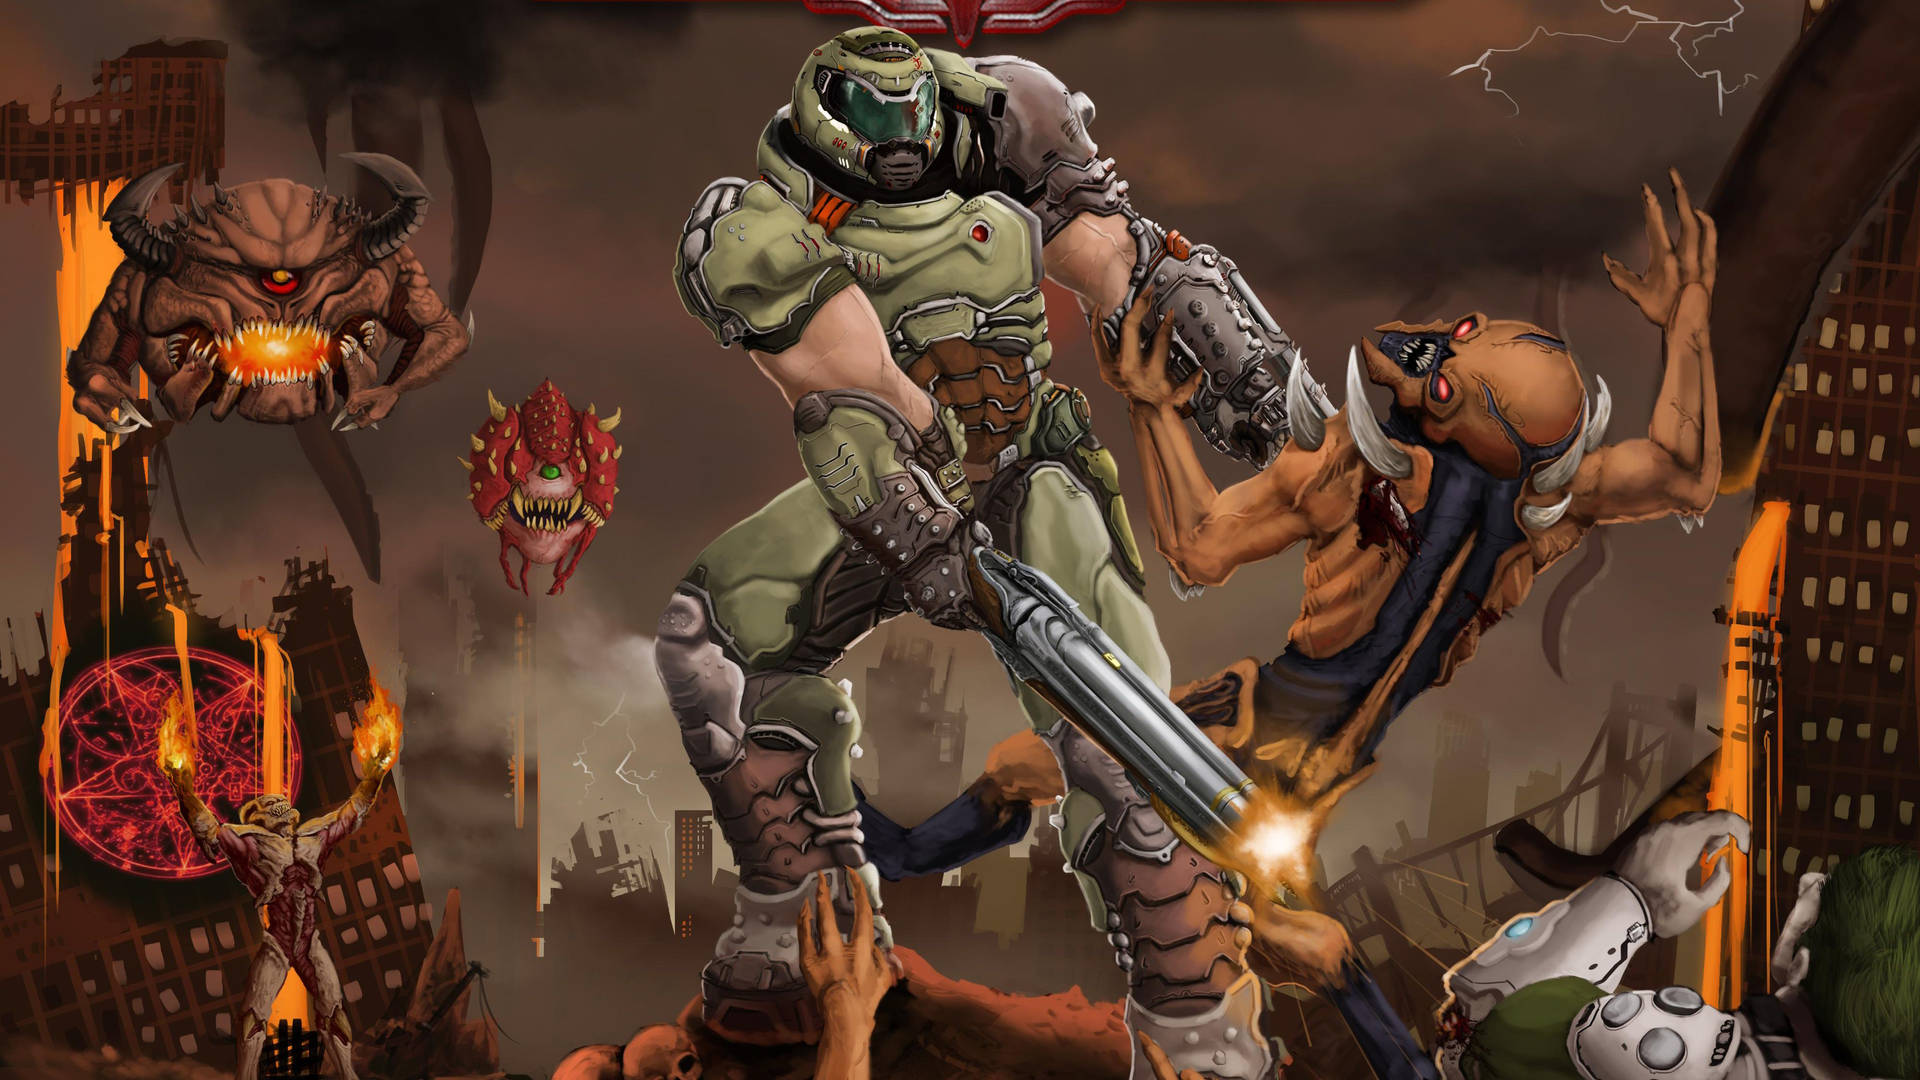 Fight your way through hordes of demons and unleash hell in Doom Eternal Wallpaper